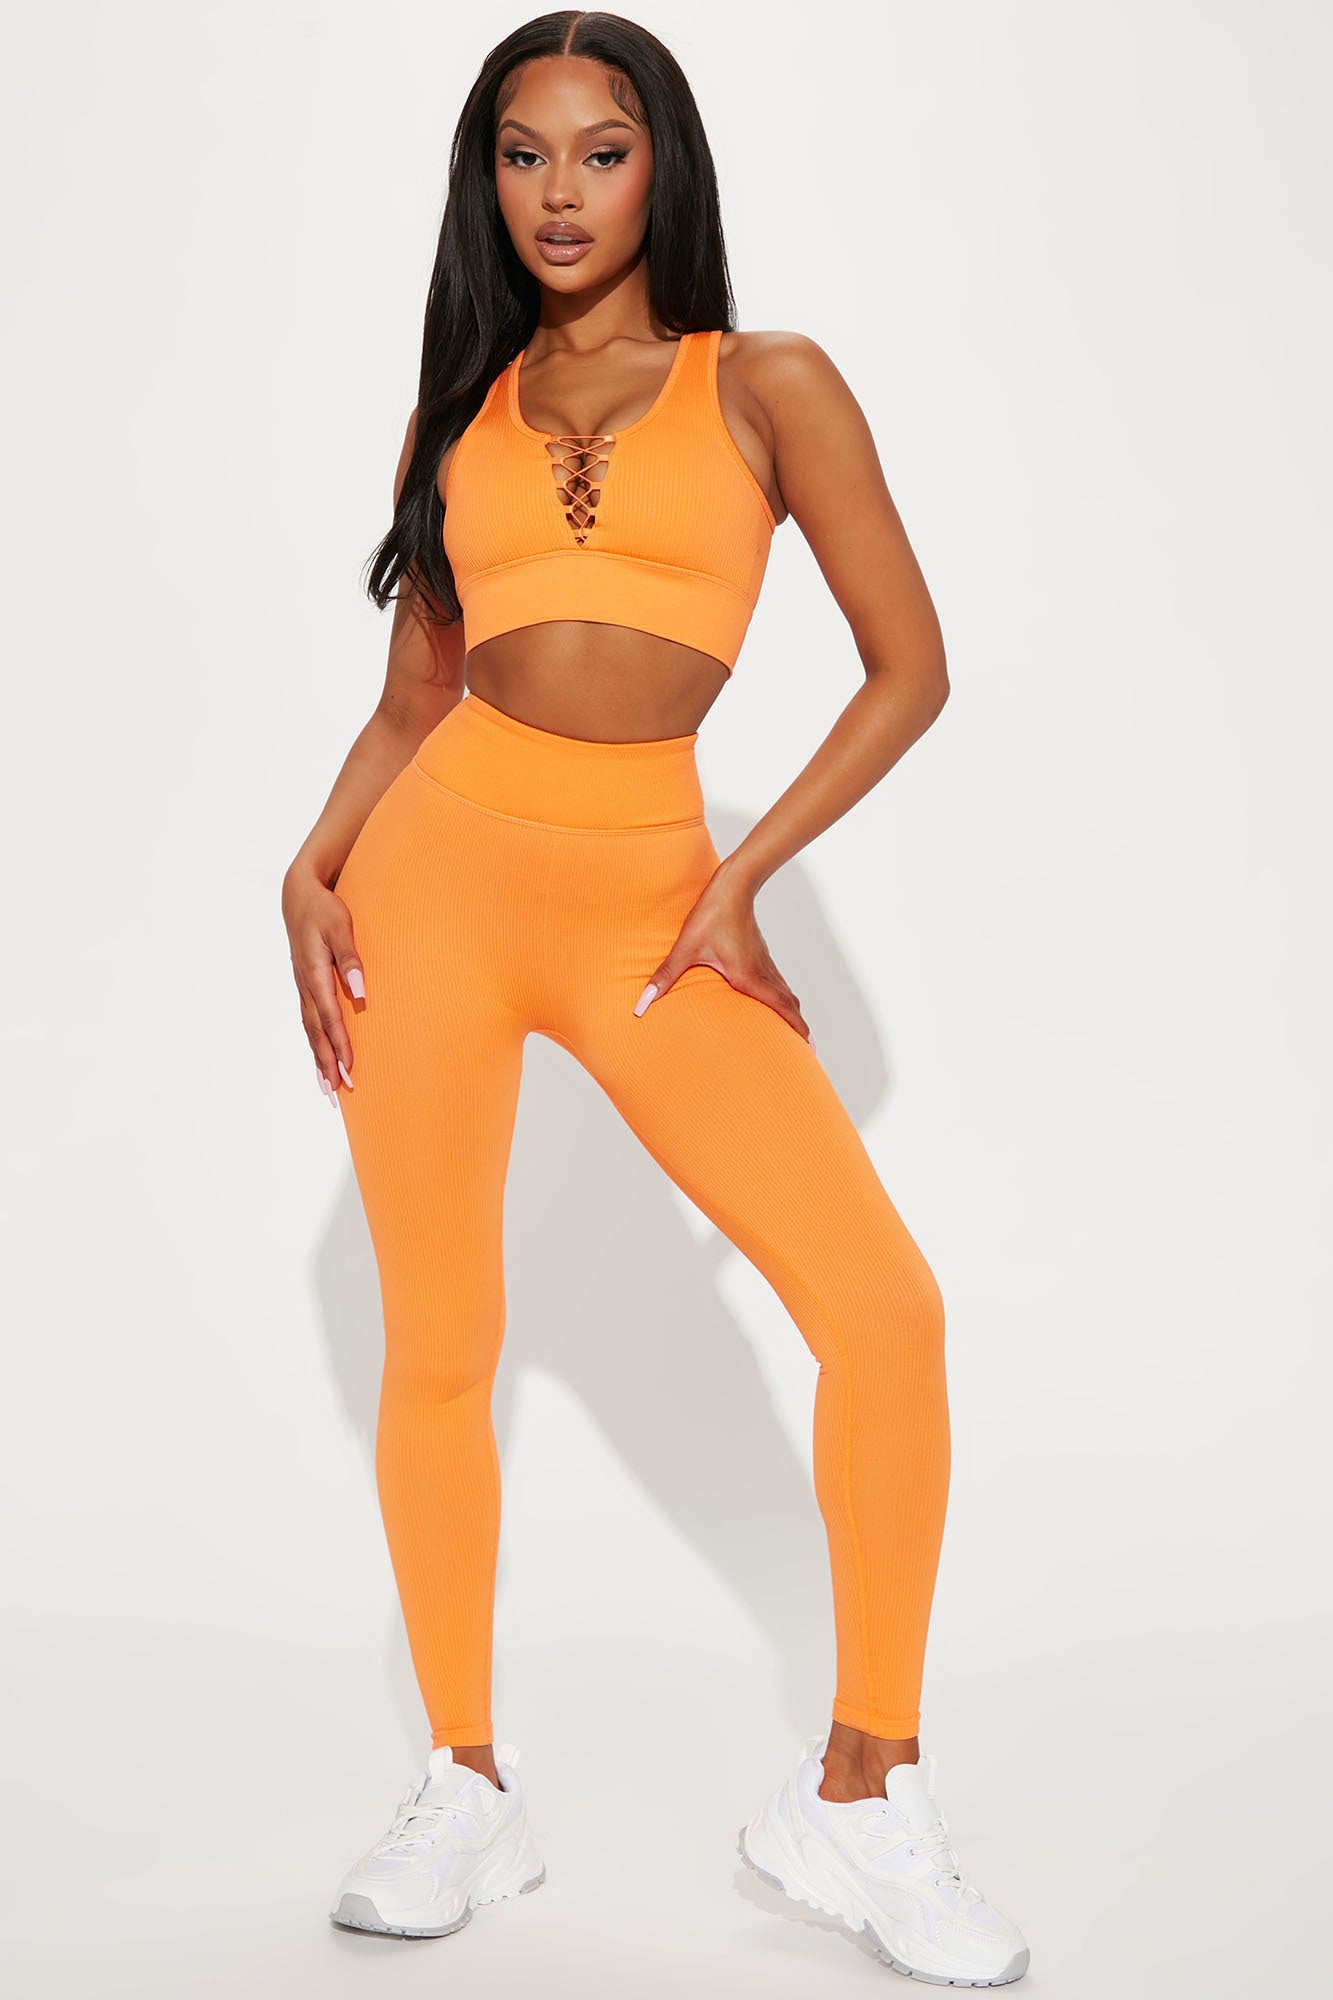 Get Up And Go Seamless Top - Orange